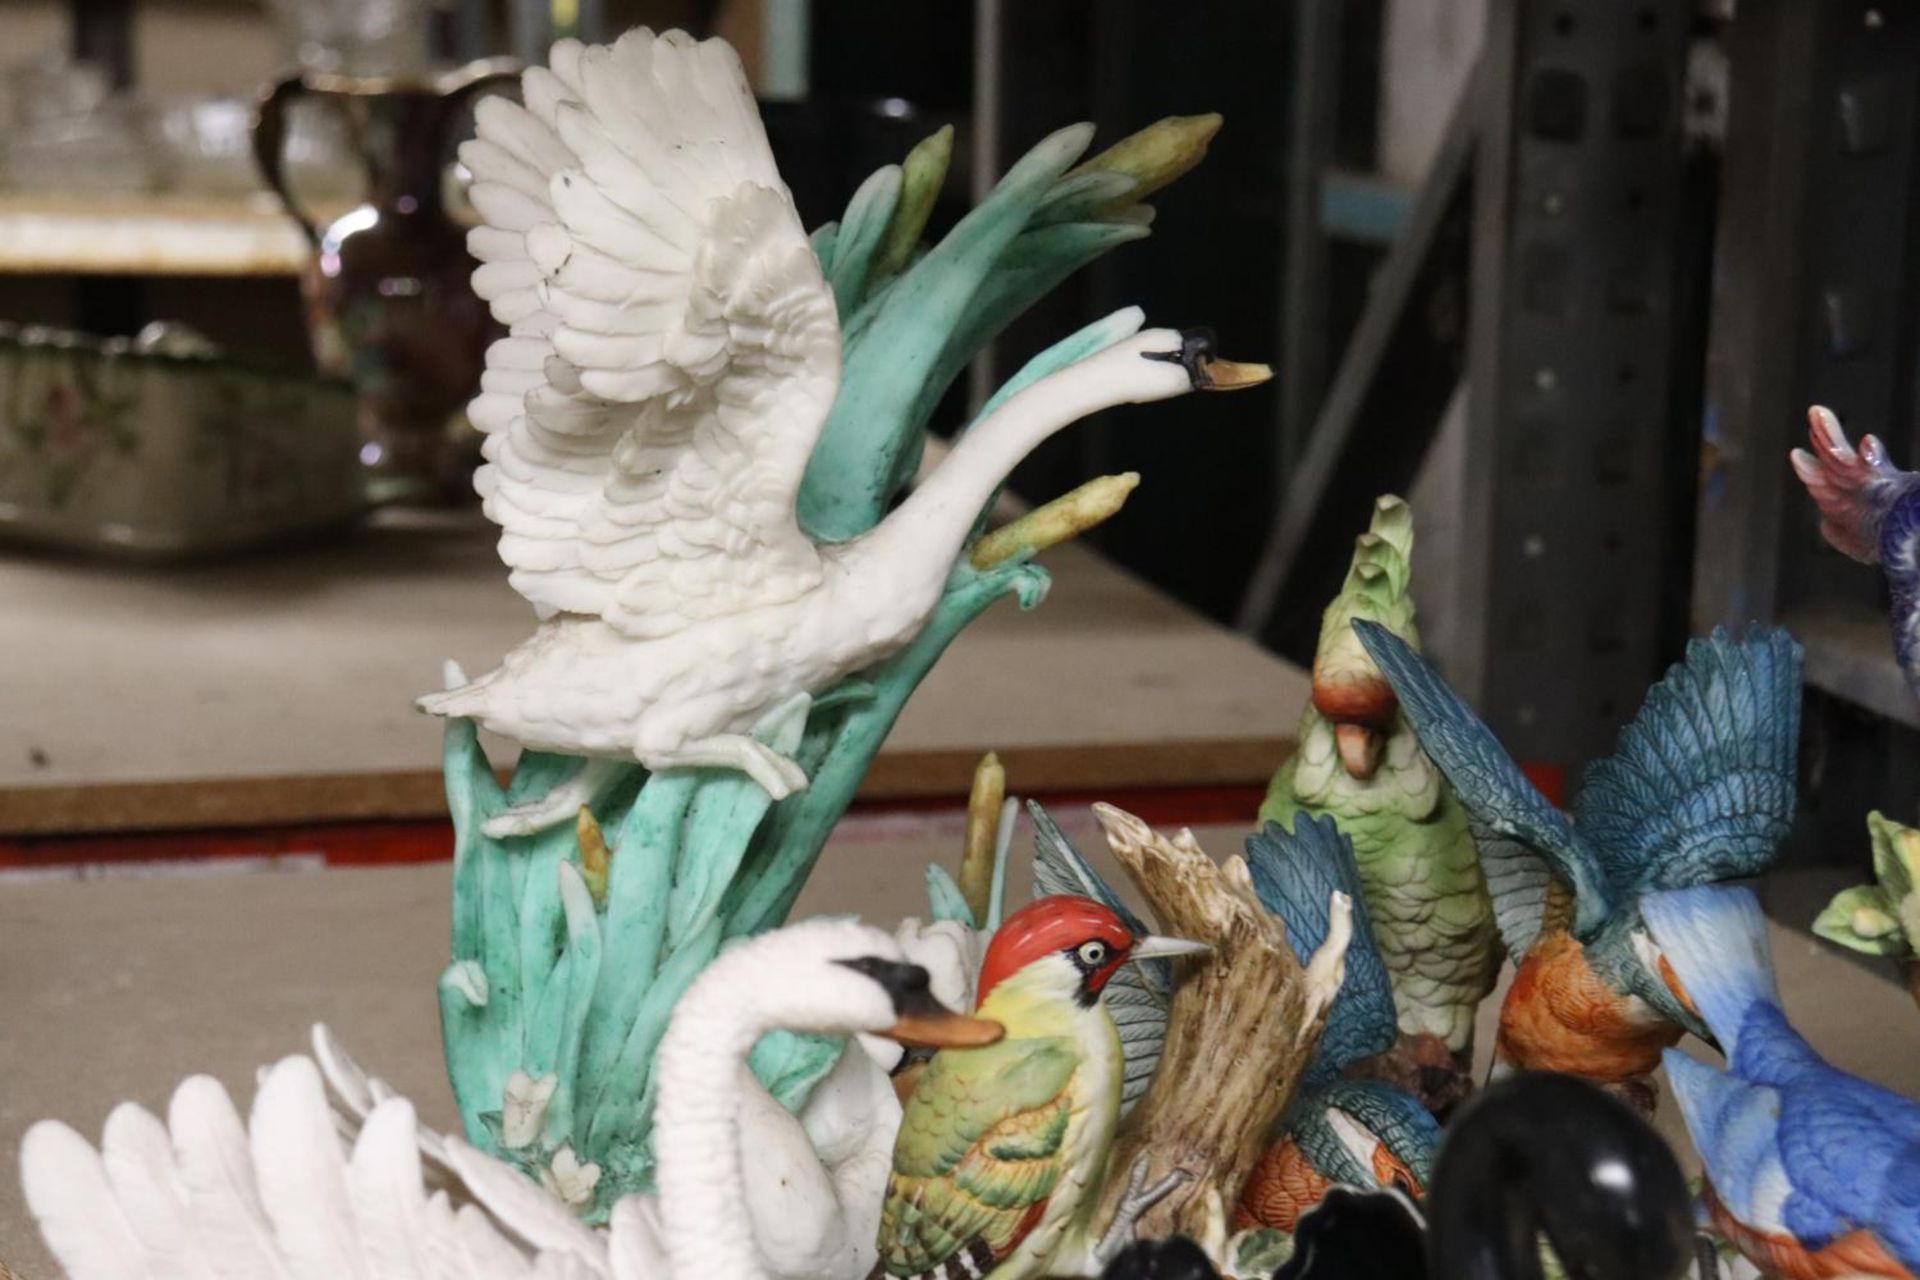 A COLLECTION OF BIRD FIGURINES TO INCLUDE SWANS, A PARROT, WOODPECKER, ETC - Bild 5 aus 6